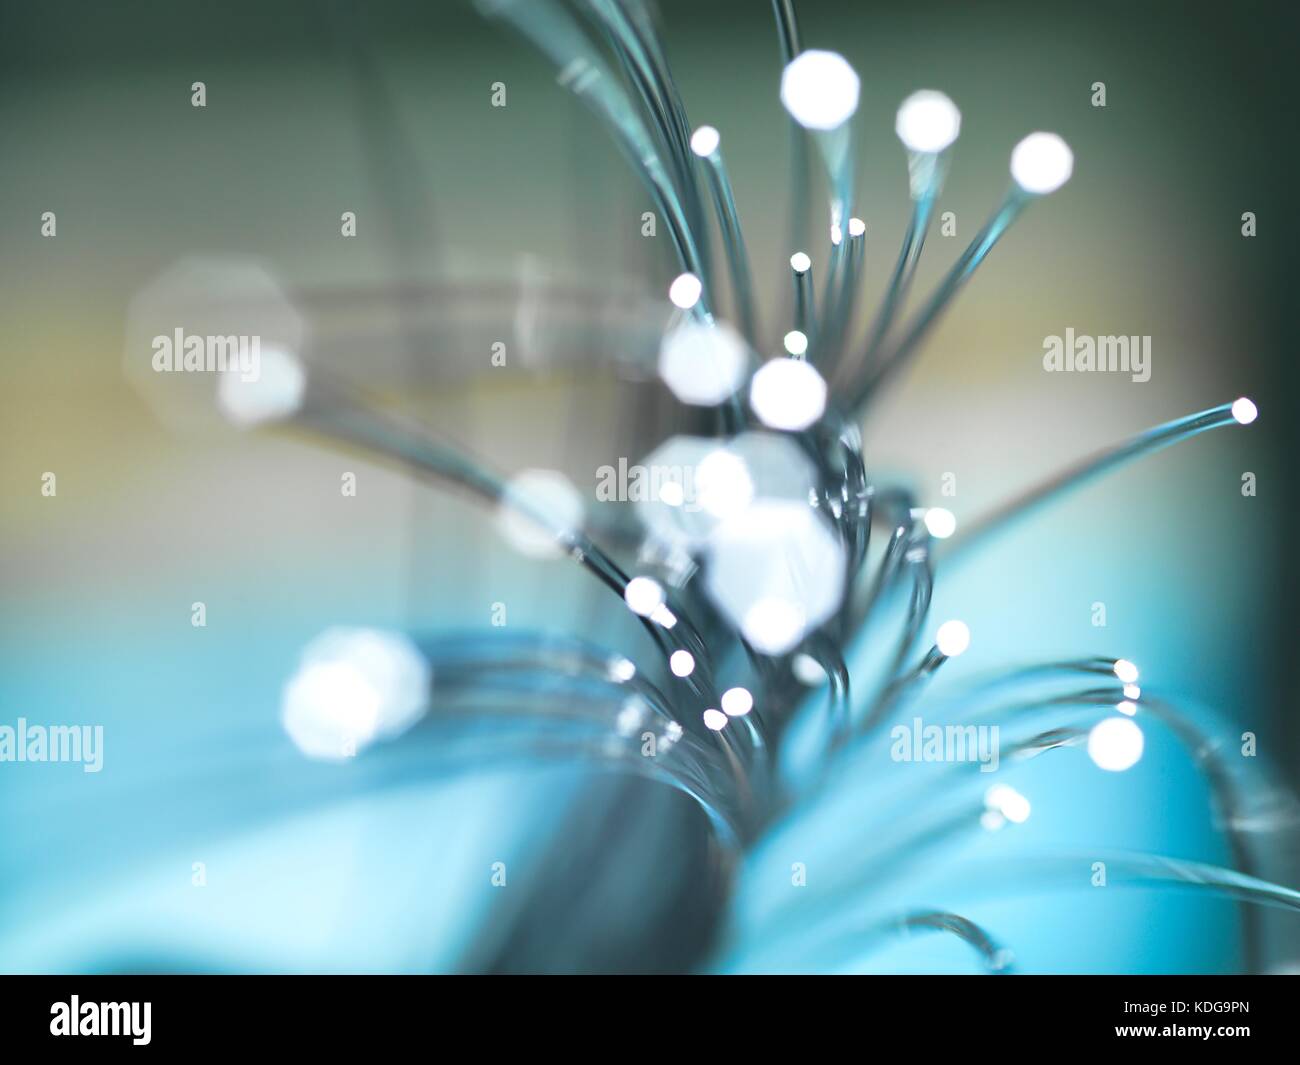 Fibre optics used to carry high volumes of data. Stock Photo